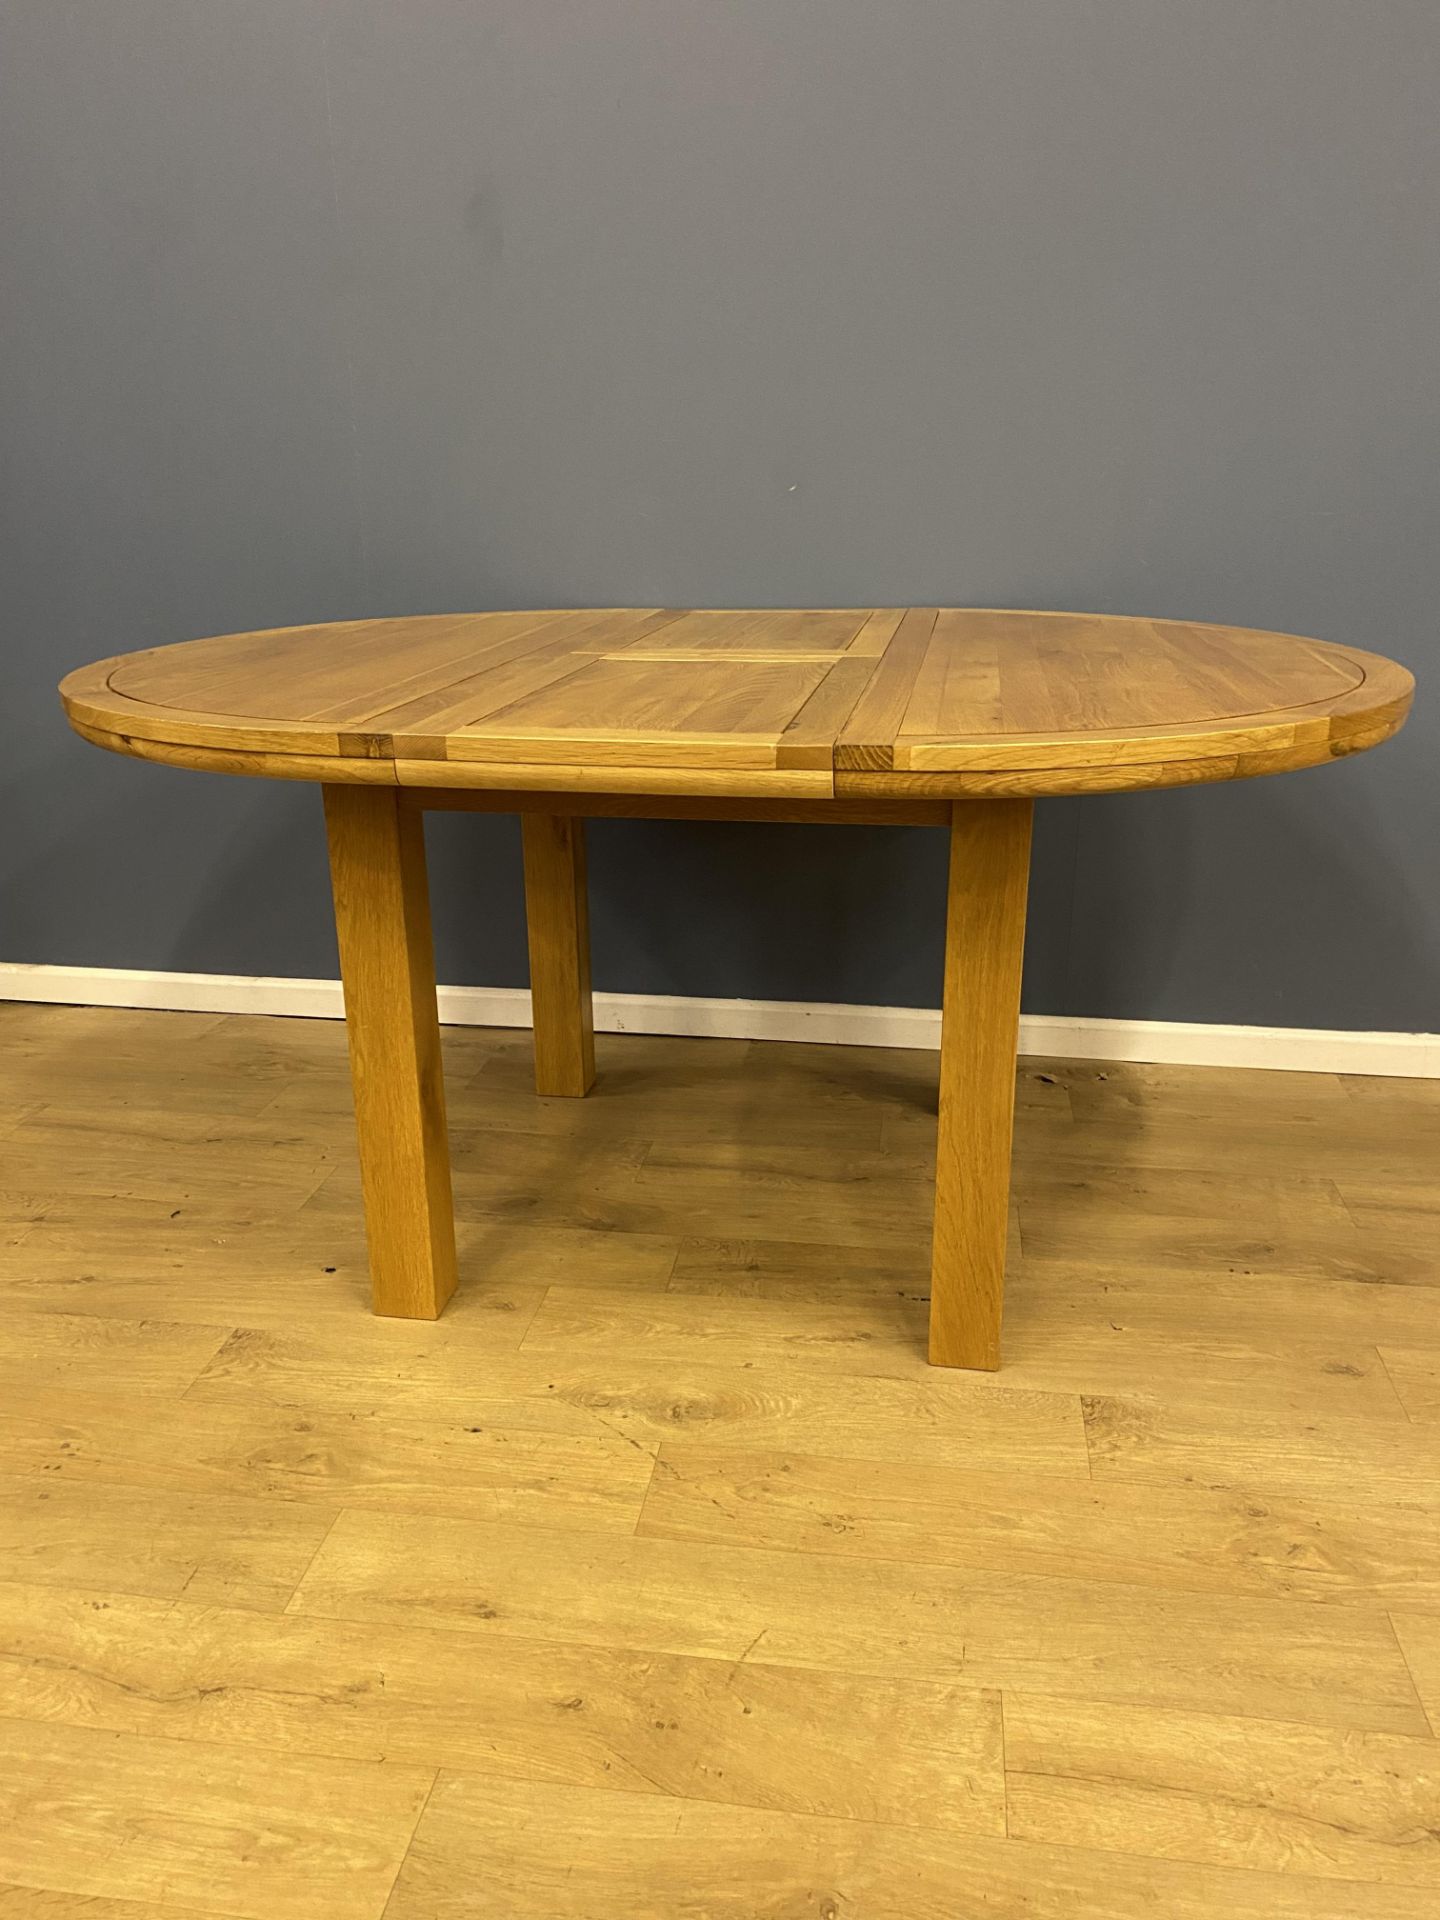 Oak circular dining table with leaf extension - Image 3 of 5